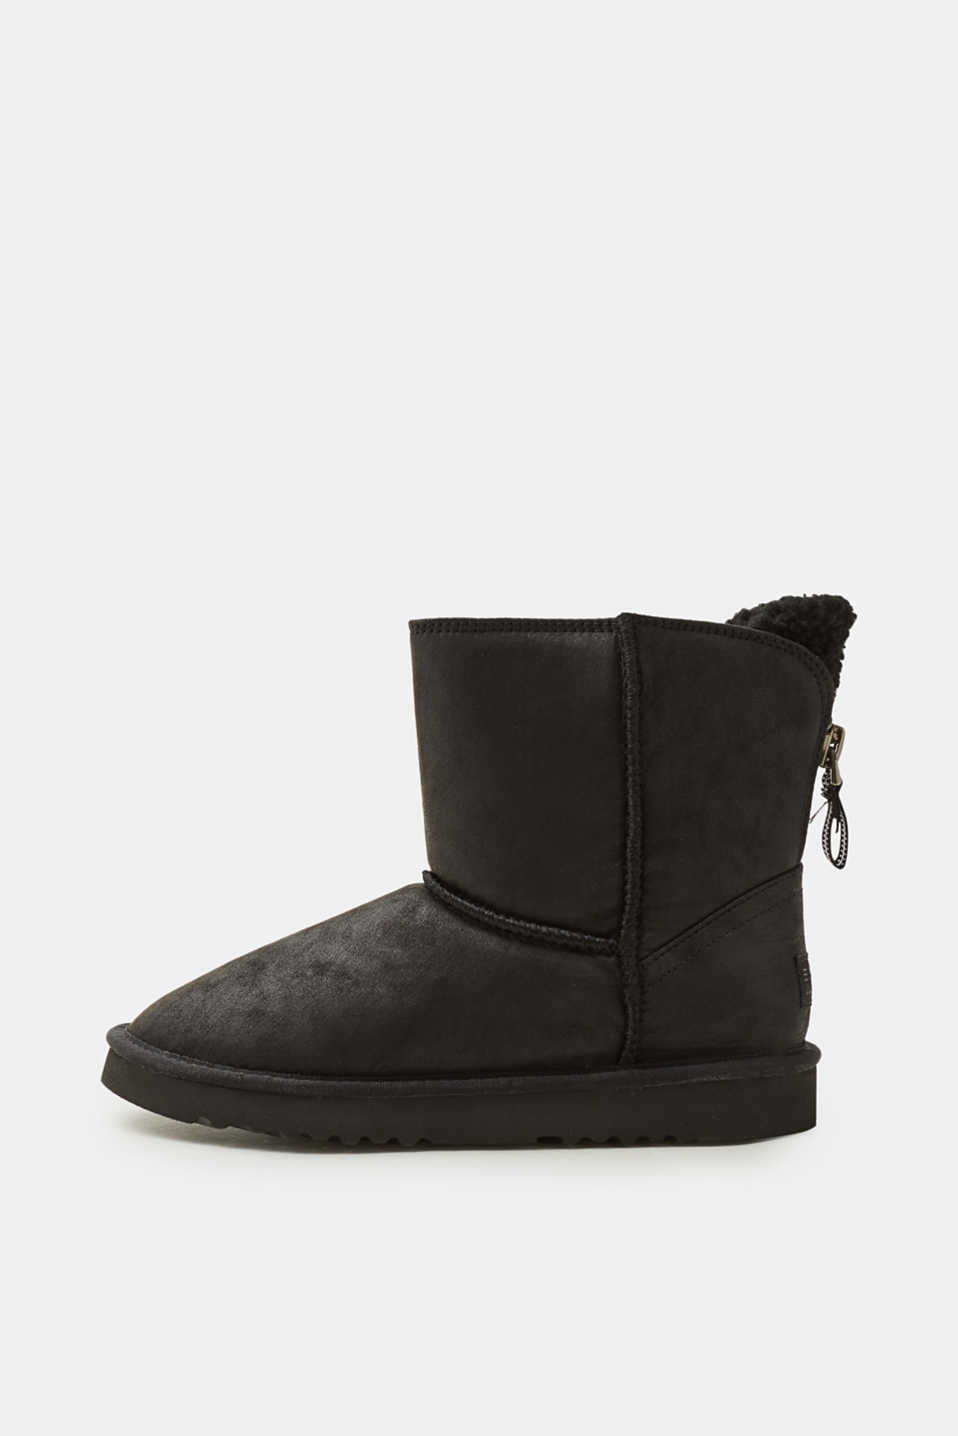 Esprit - Winter boots with teddy fur lining